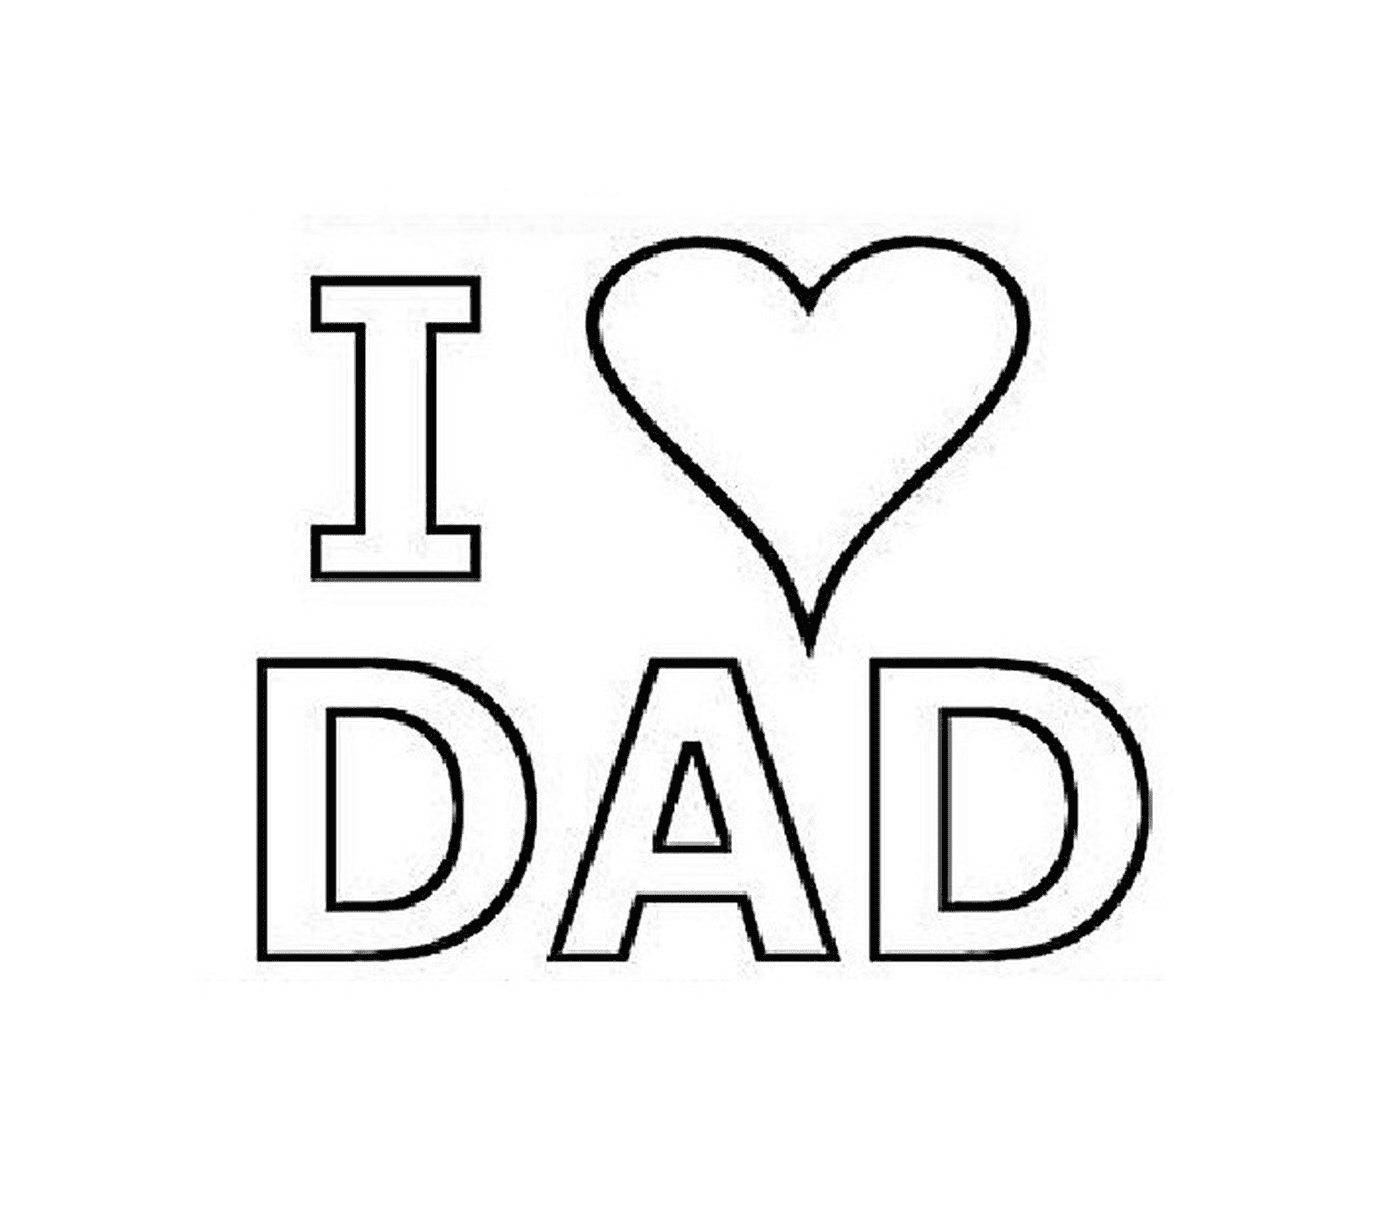   I love you dad 